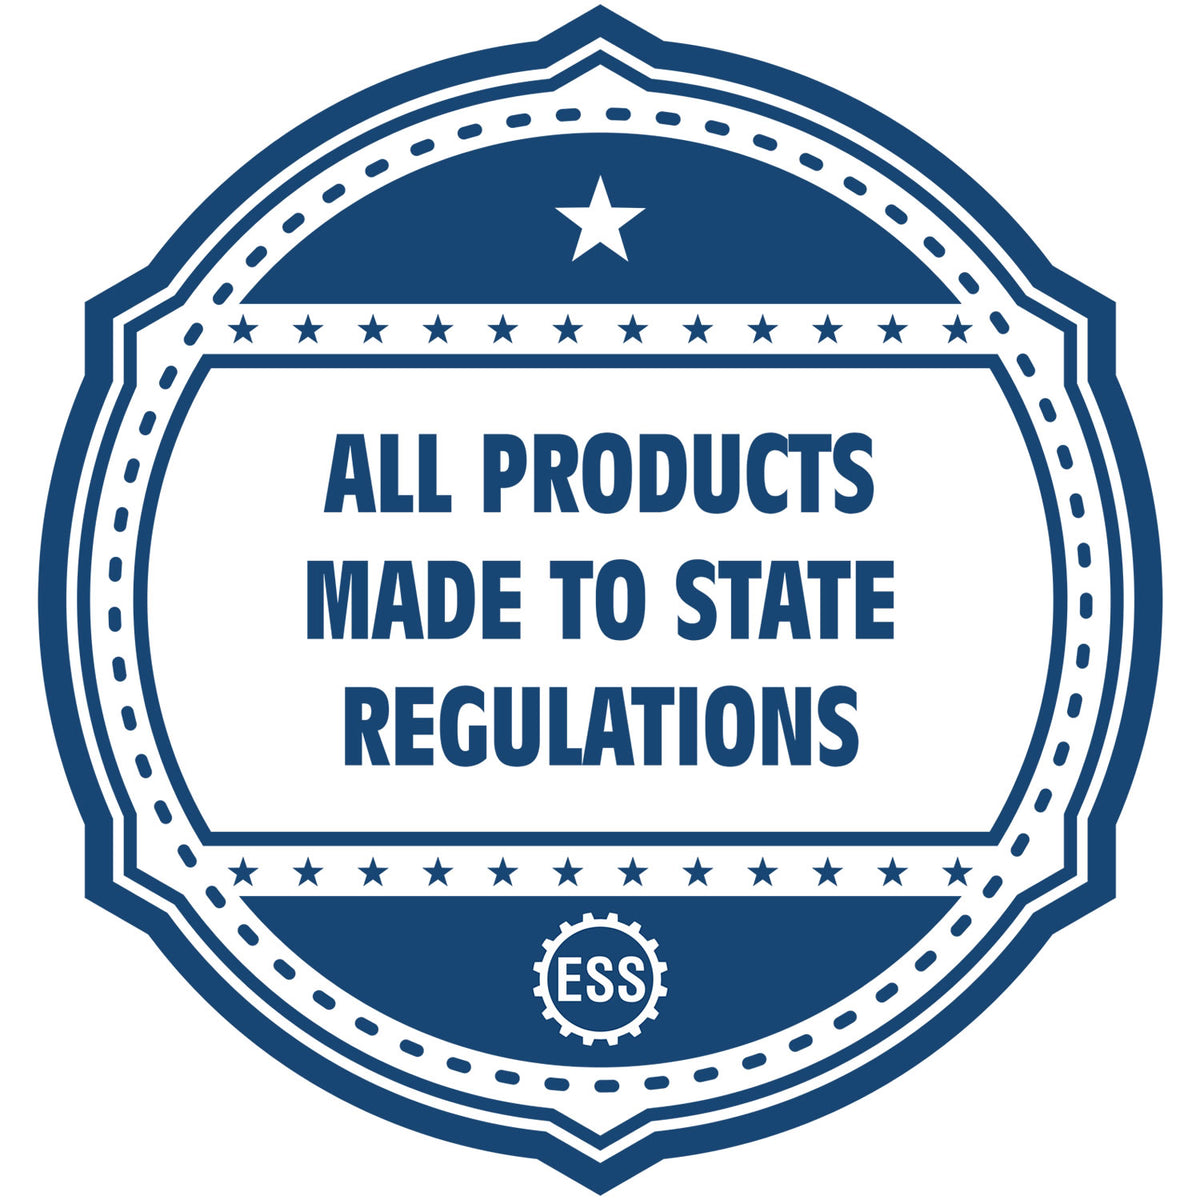 An icon or badge element for the Premium MaxLight Pre-Inked Kansas Engineering Stamp showing that this product is made in compliance with state regulations.